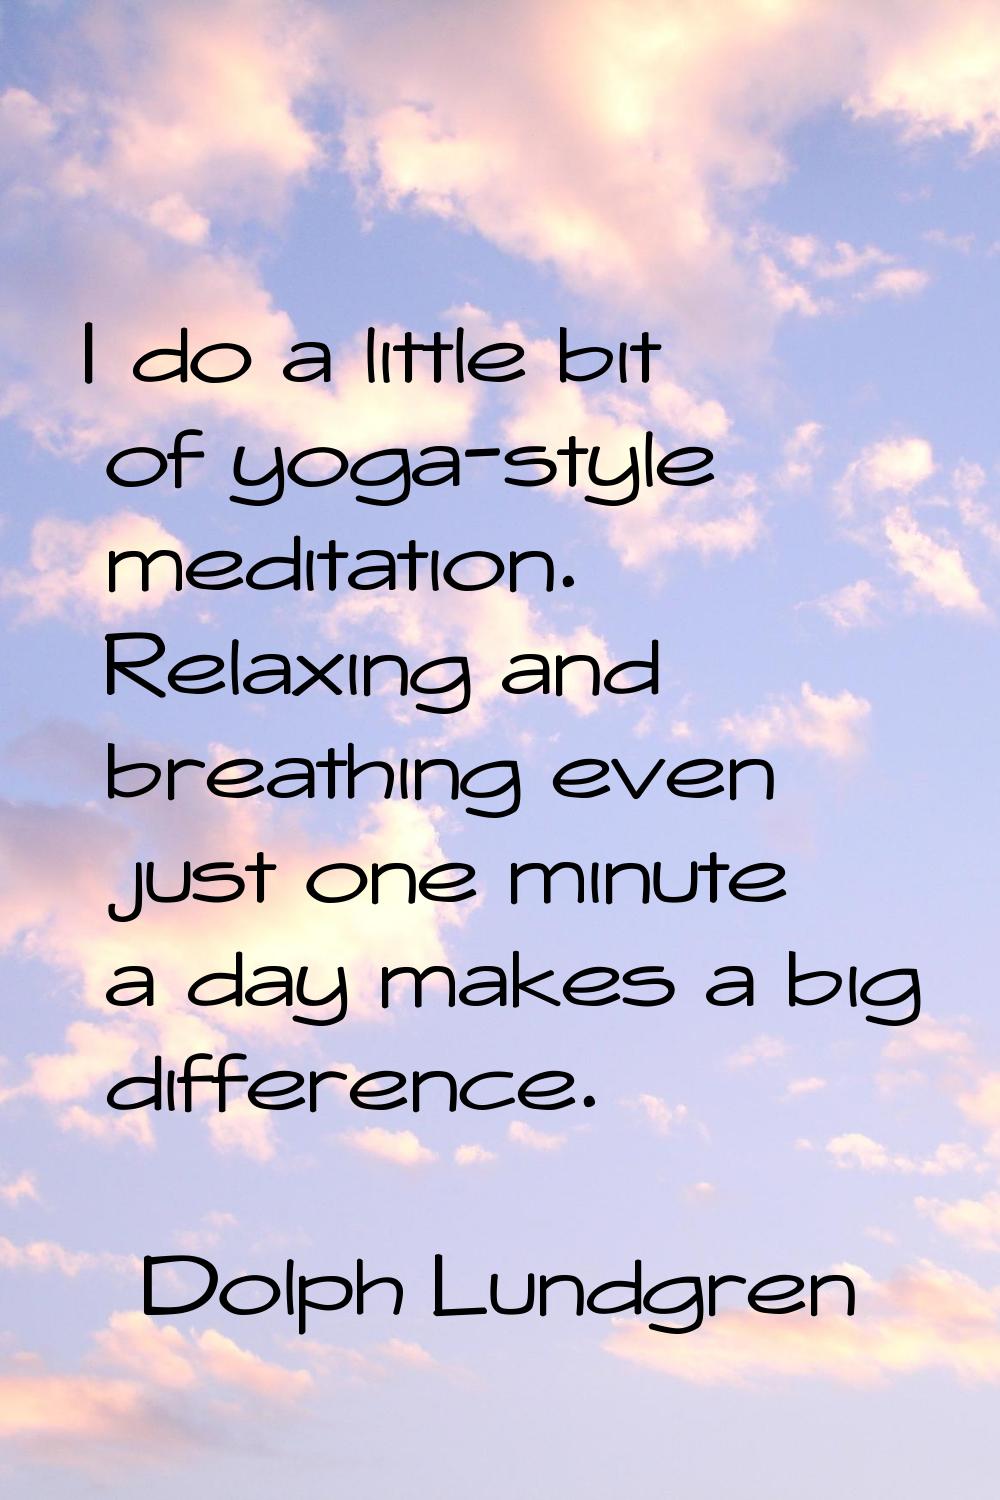 I do a little bit of yoga-style meditation. Relaxing and breathing even just one minute a day makes